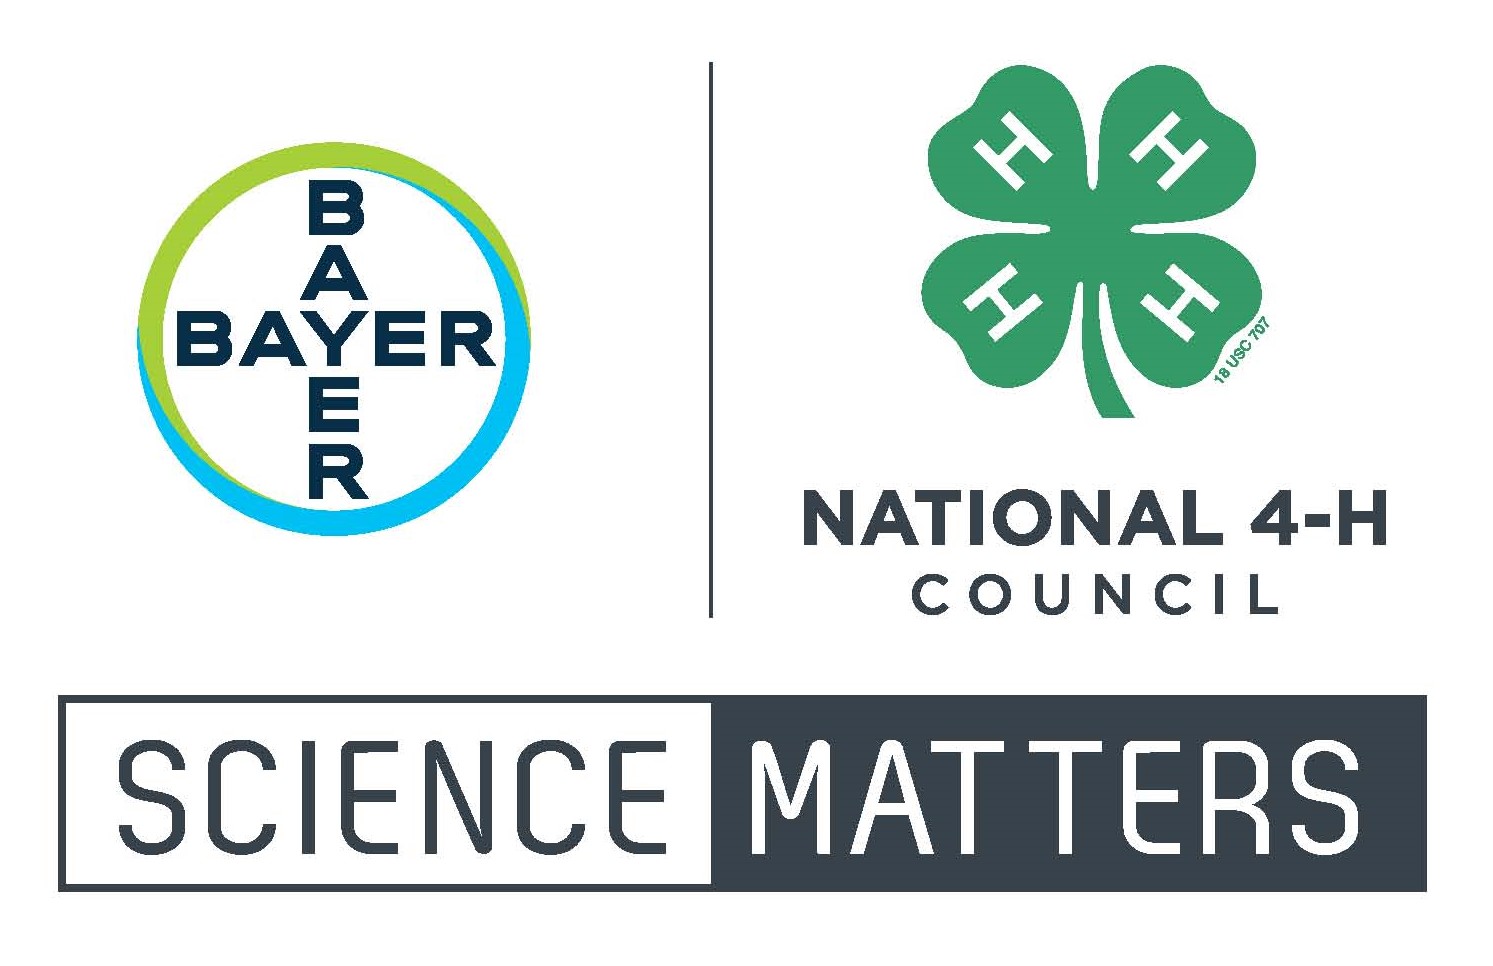 Bayer-2018-Style-ScienceMatters-Logo-Lockup_RGB-cropped